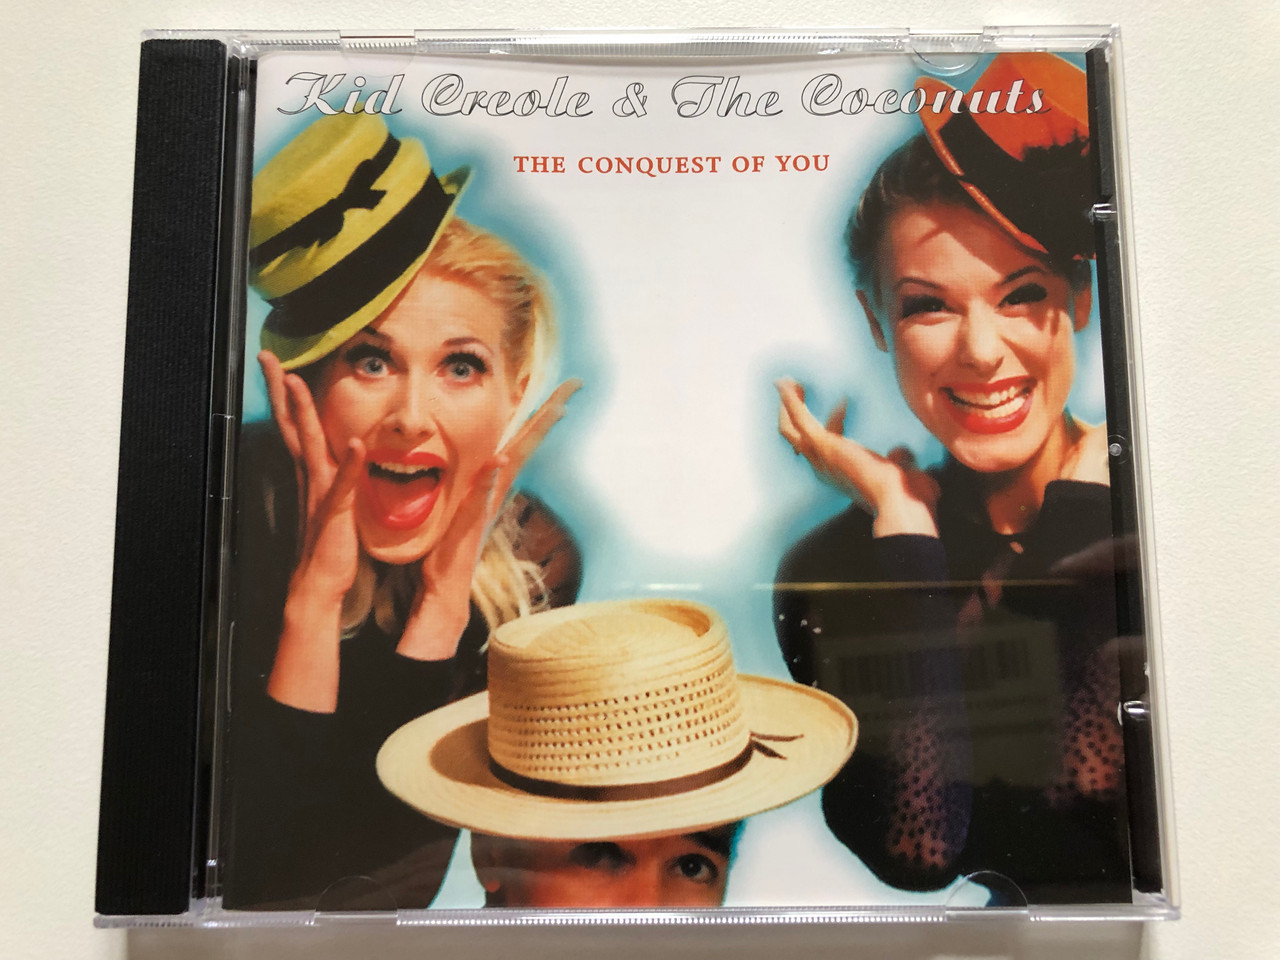 https://cdn10.bigcommerce.com/s-62bdpkt7pb/products/0/images/309981/Kid_Creole_The_Coconuts_The_Conquest_Of_You_SPV_Recordings_Audio_CD_1997_SPV_085-44712_1__62253.1699305931.1280.1280.JPG?c=2